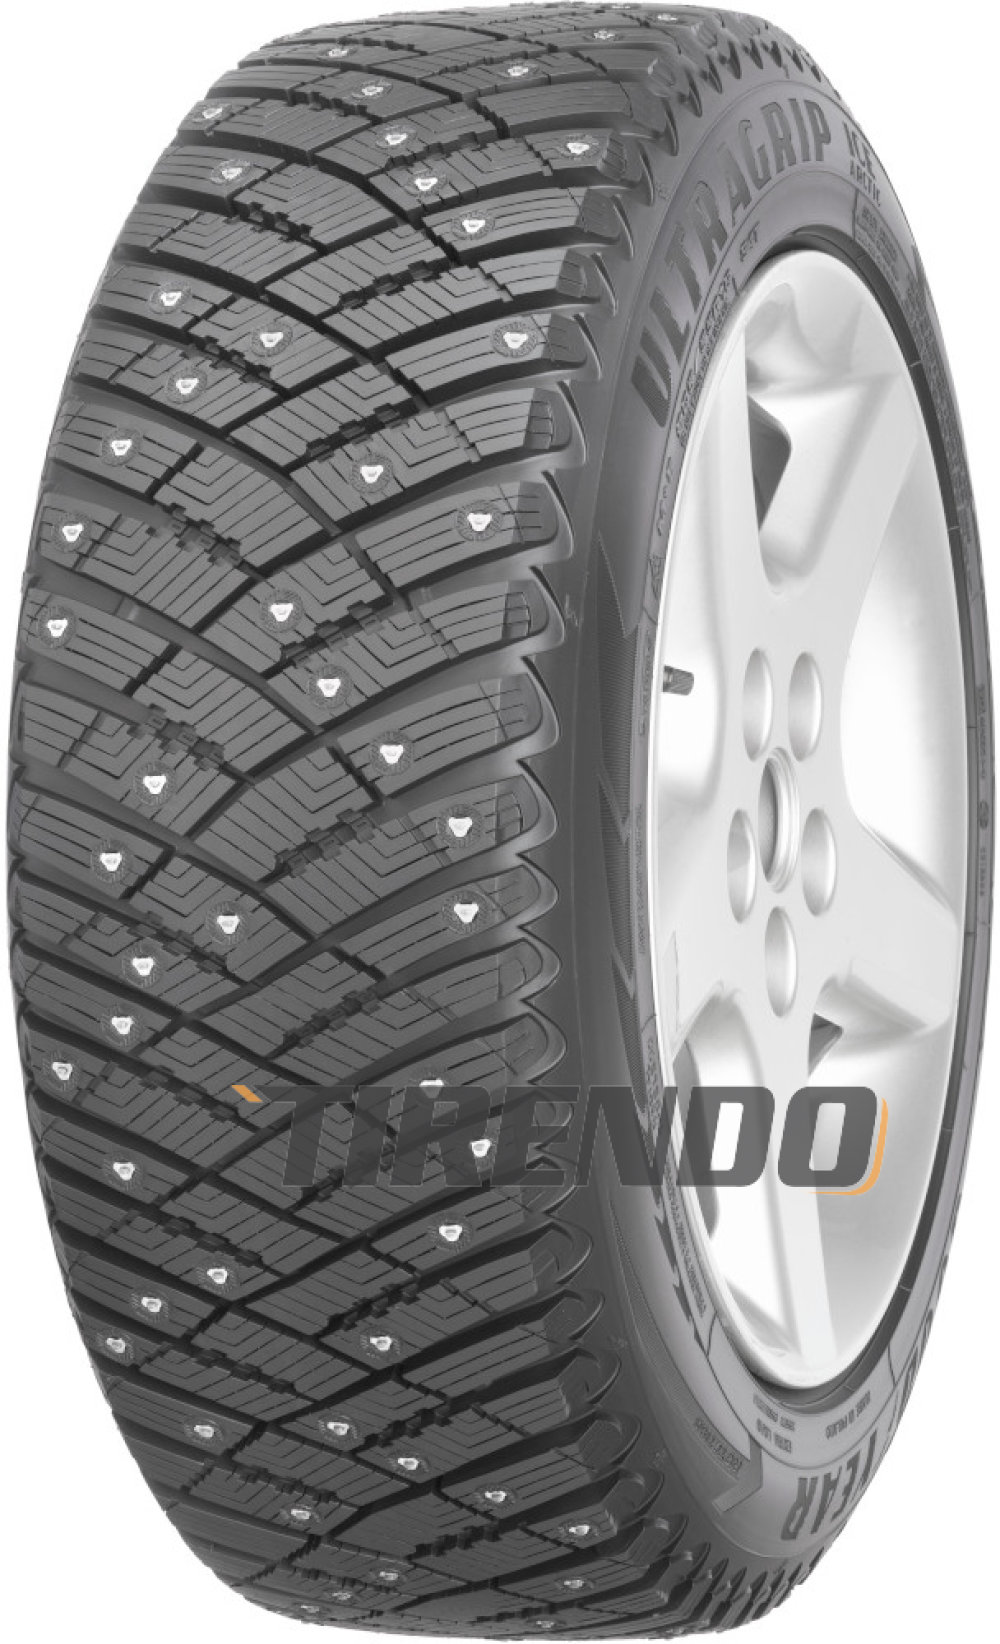 Image of        Goodyear Ultra Grip Ice Arctic ( 185/60 R15 88T XL, pneumatico chiodato )